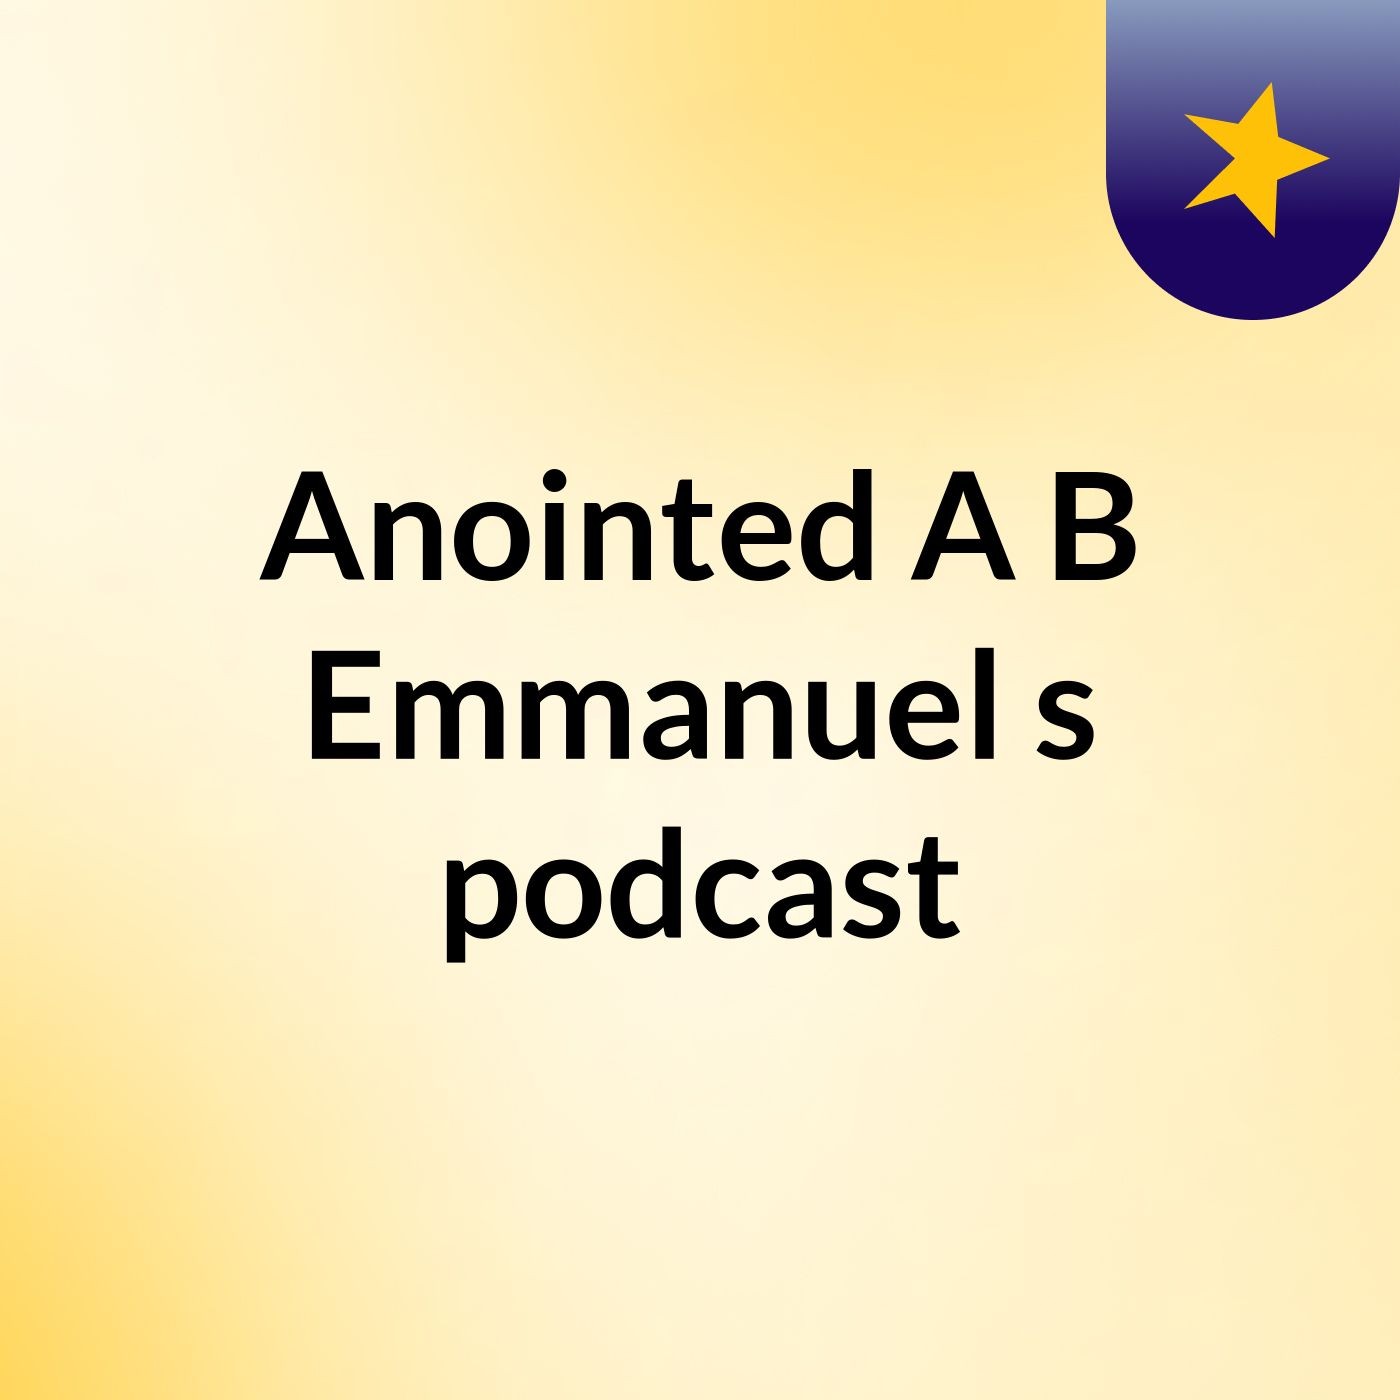 Anointed A B Emmanuel's podcast